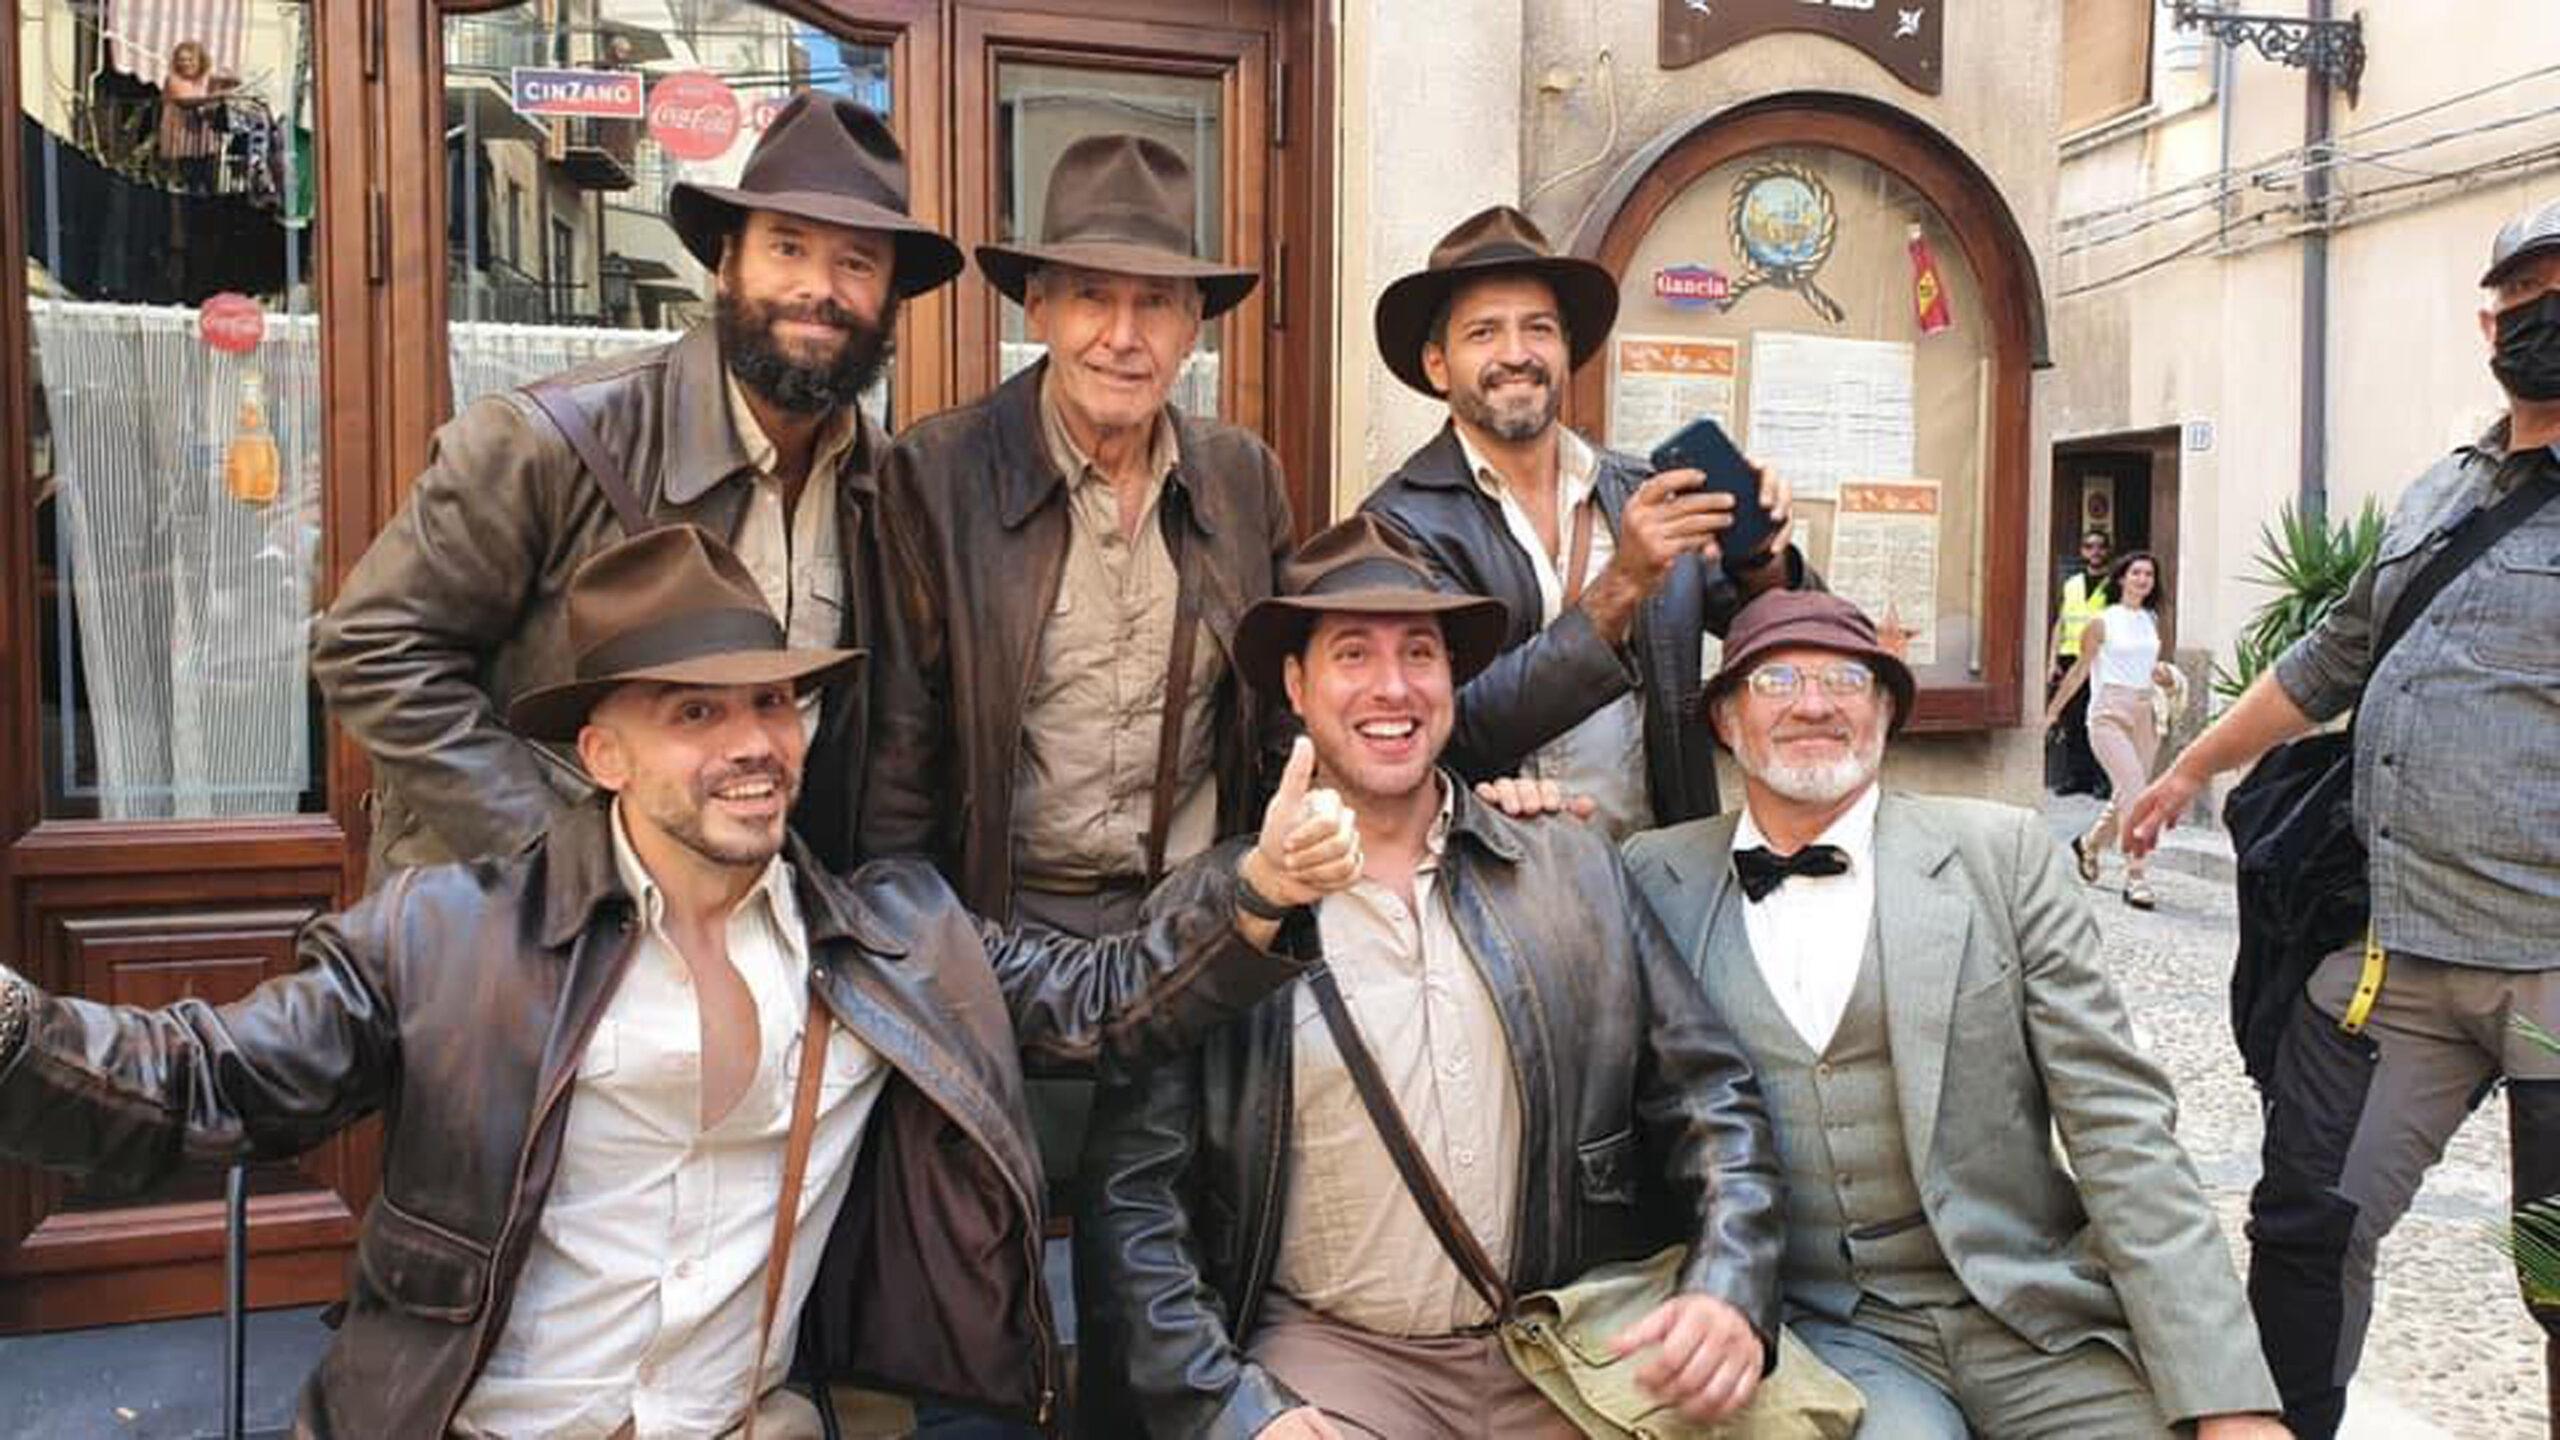 Harrison Ford poses with members Italy’s Indiana Jones Fan Club all dressed in full “Indy” costume while filming "Indiana Jones 5" on location in Italy.